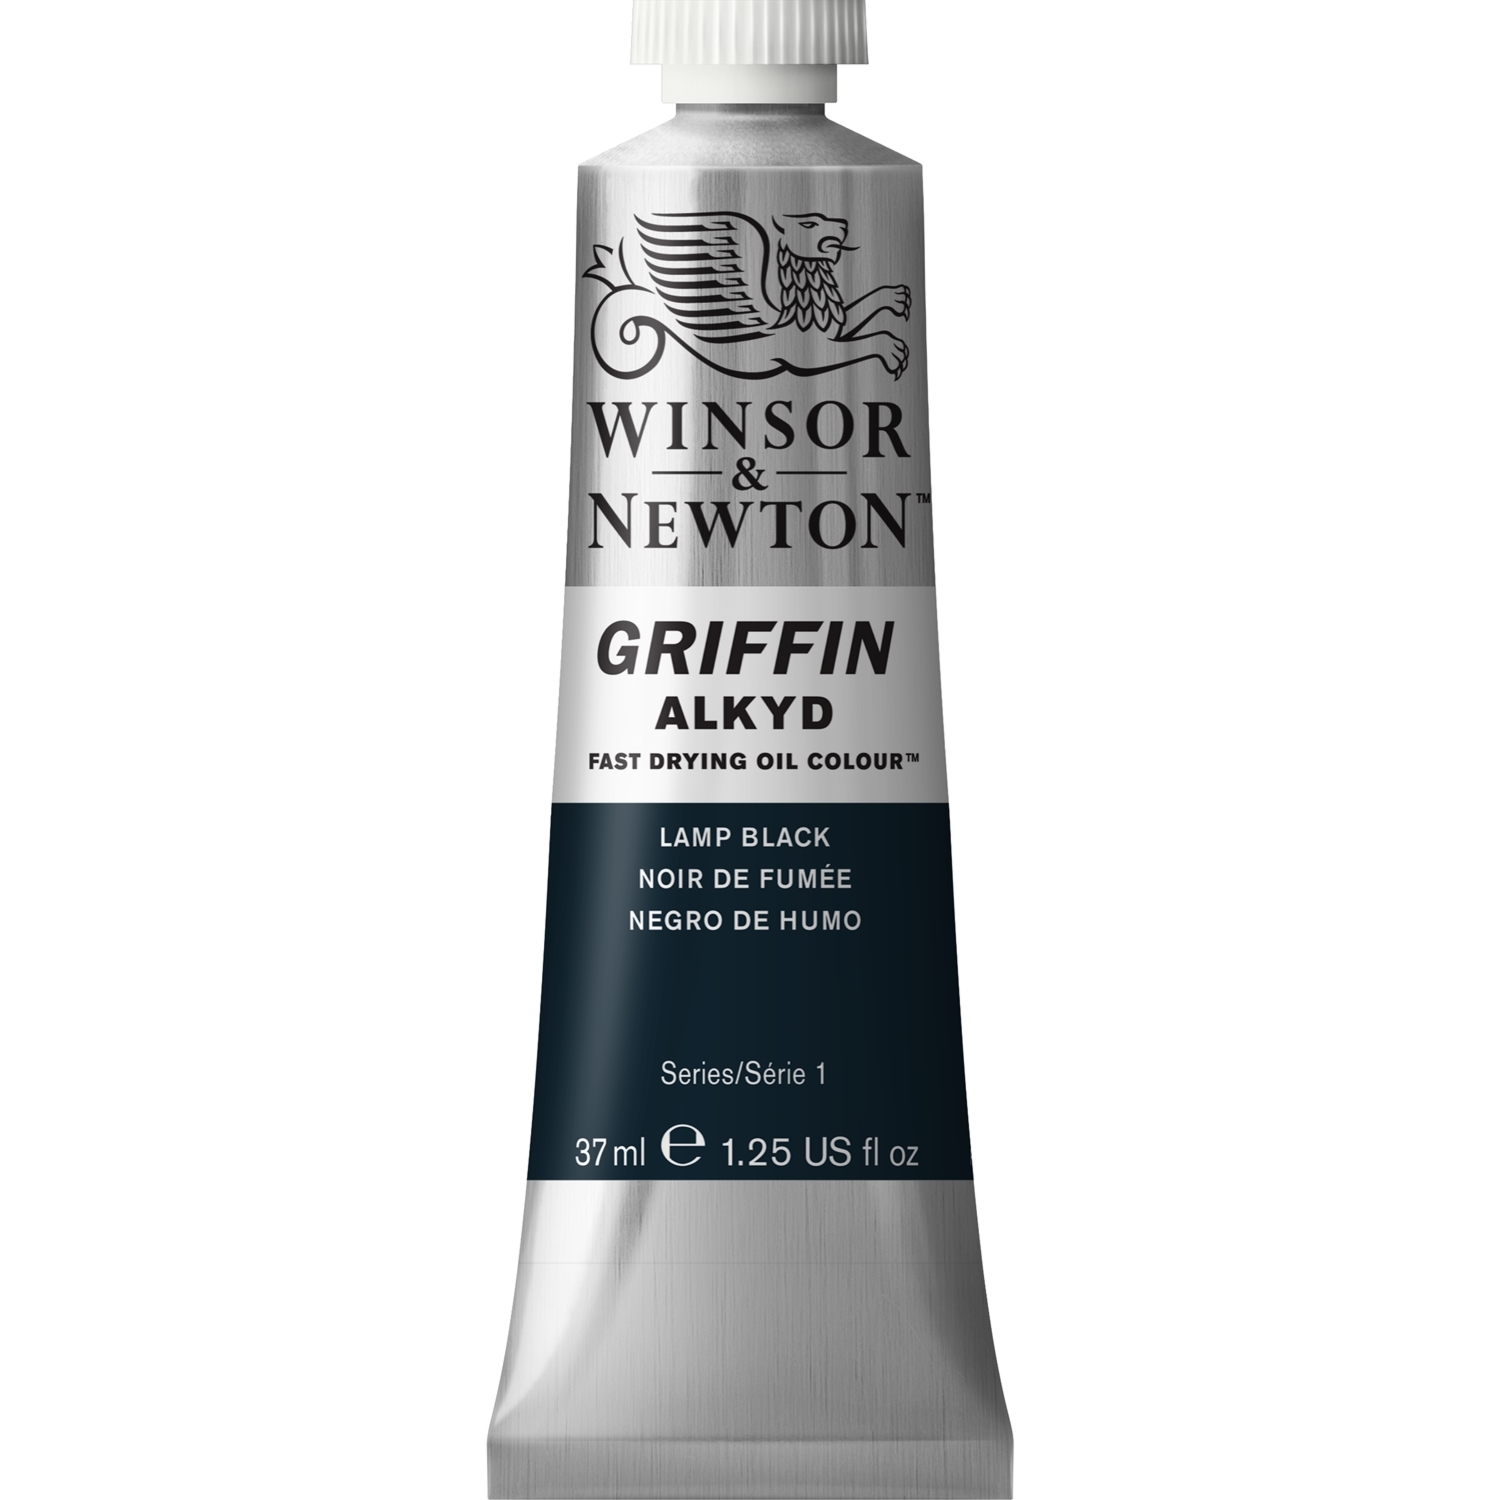 Winsor and Newton Griffin Alkyd Oil Colour - Lamp Black Image 1